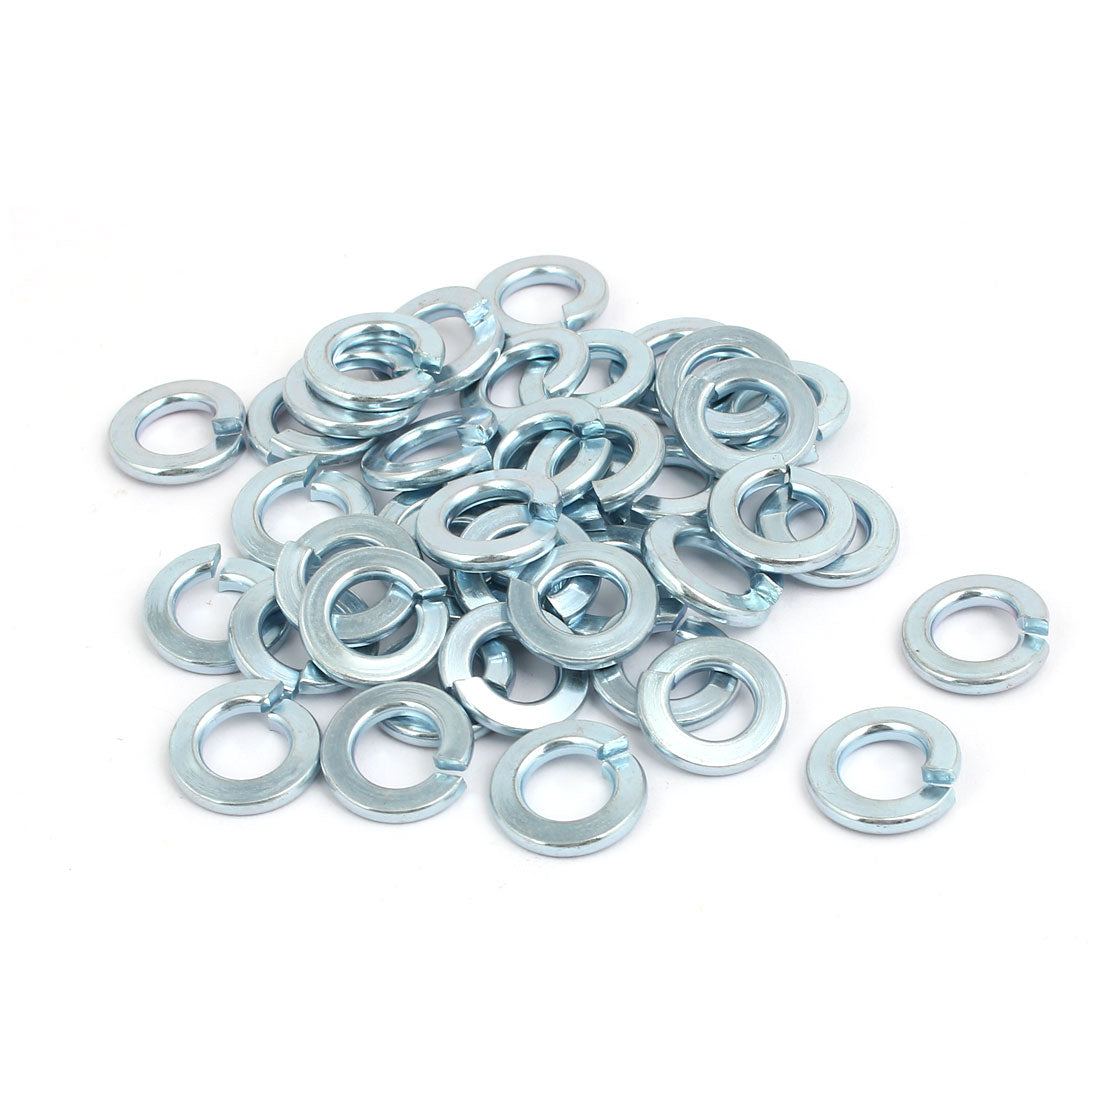 uxcell Uxcell 40pcs 5/16-inch Inner Dia Carbon Steel Split Lock Spring Washer Silver Blue